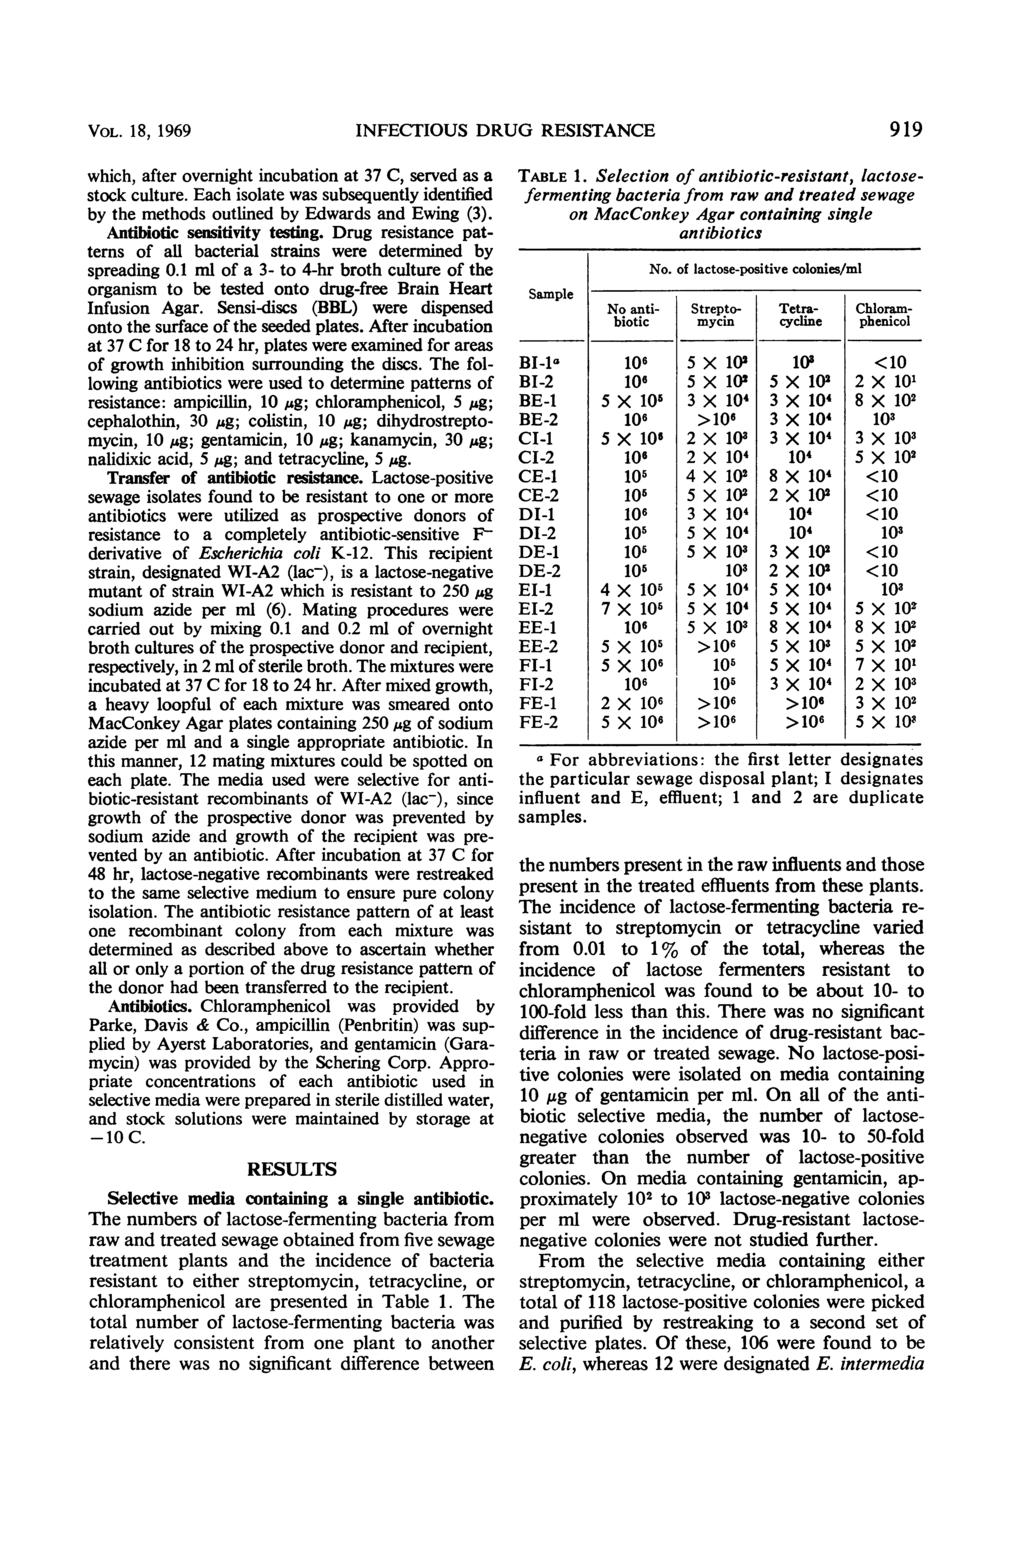 VOL. 8, 969 INFECTIOUS DRUG RESISTANCE 99 which, after overnight incubation at 37 C, served as a stock culture.